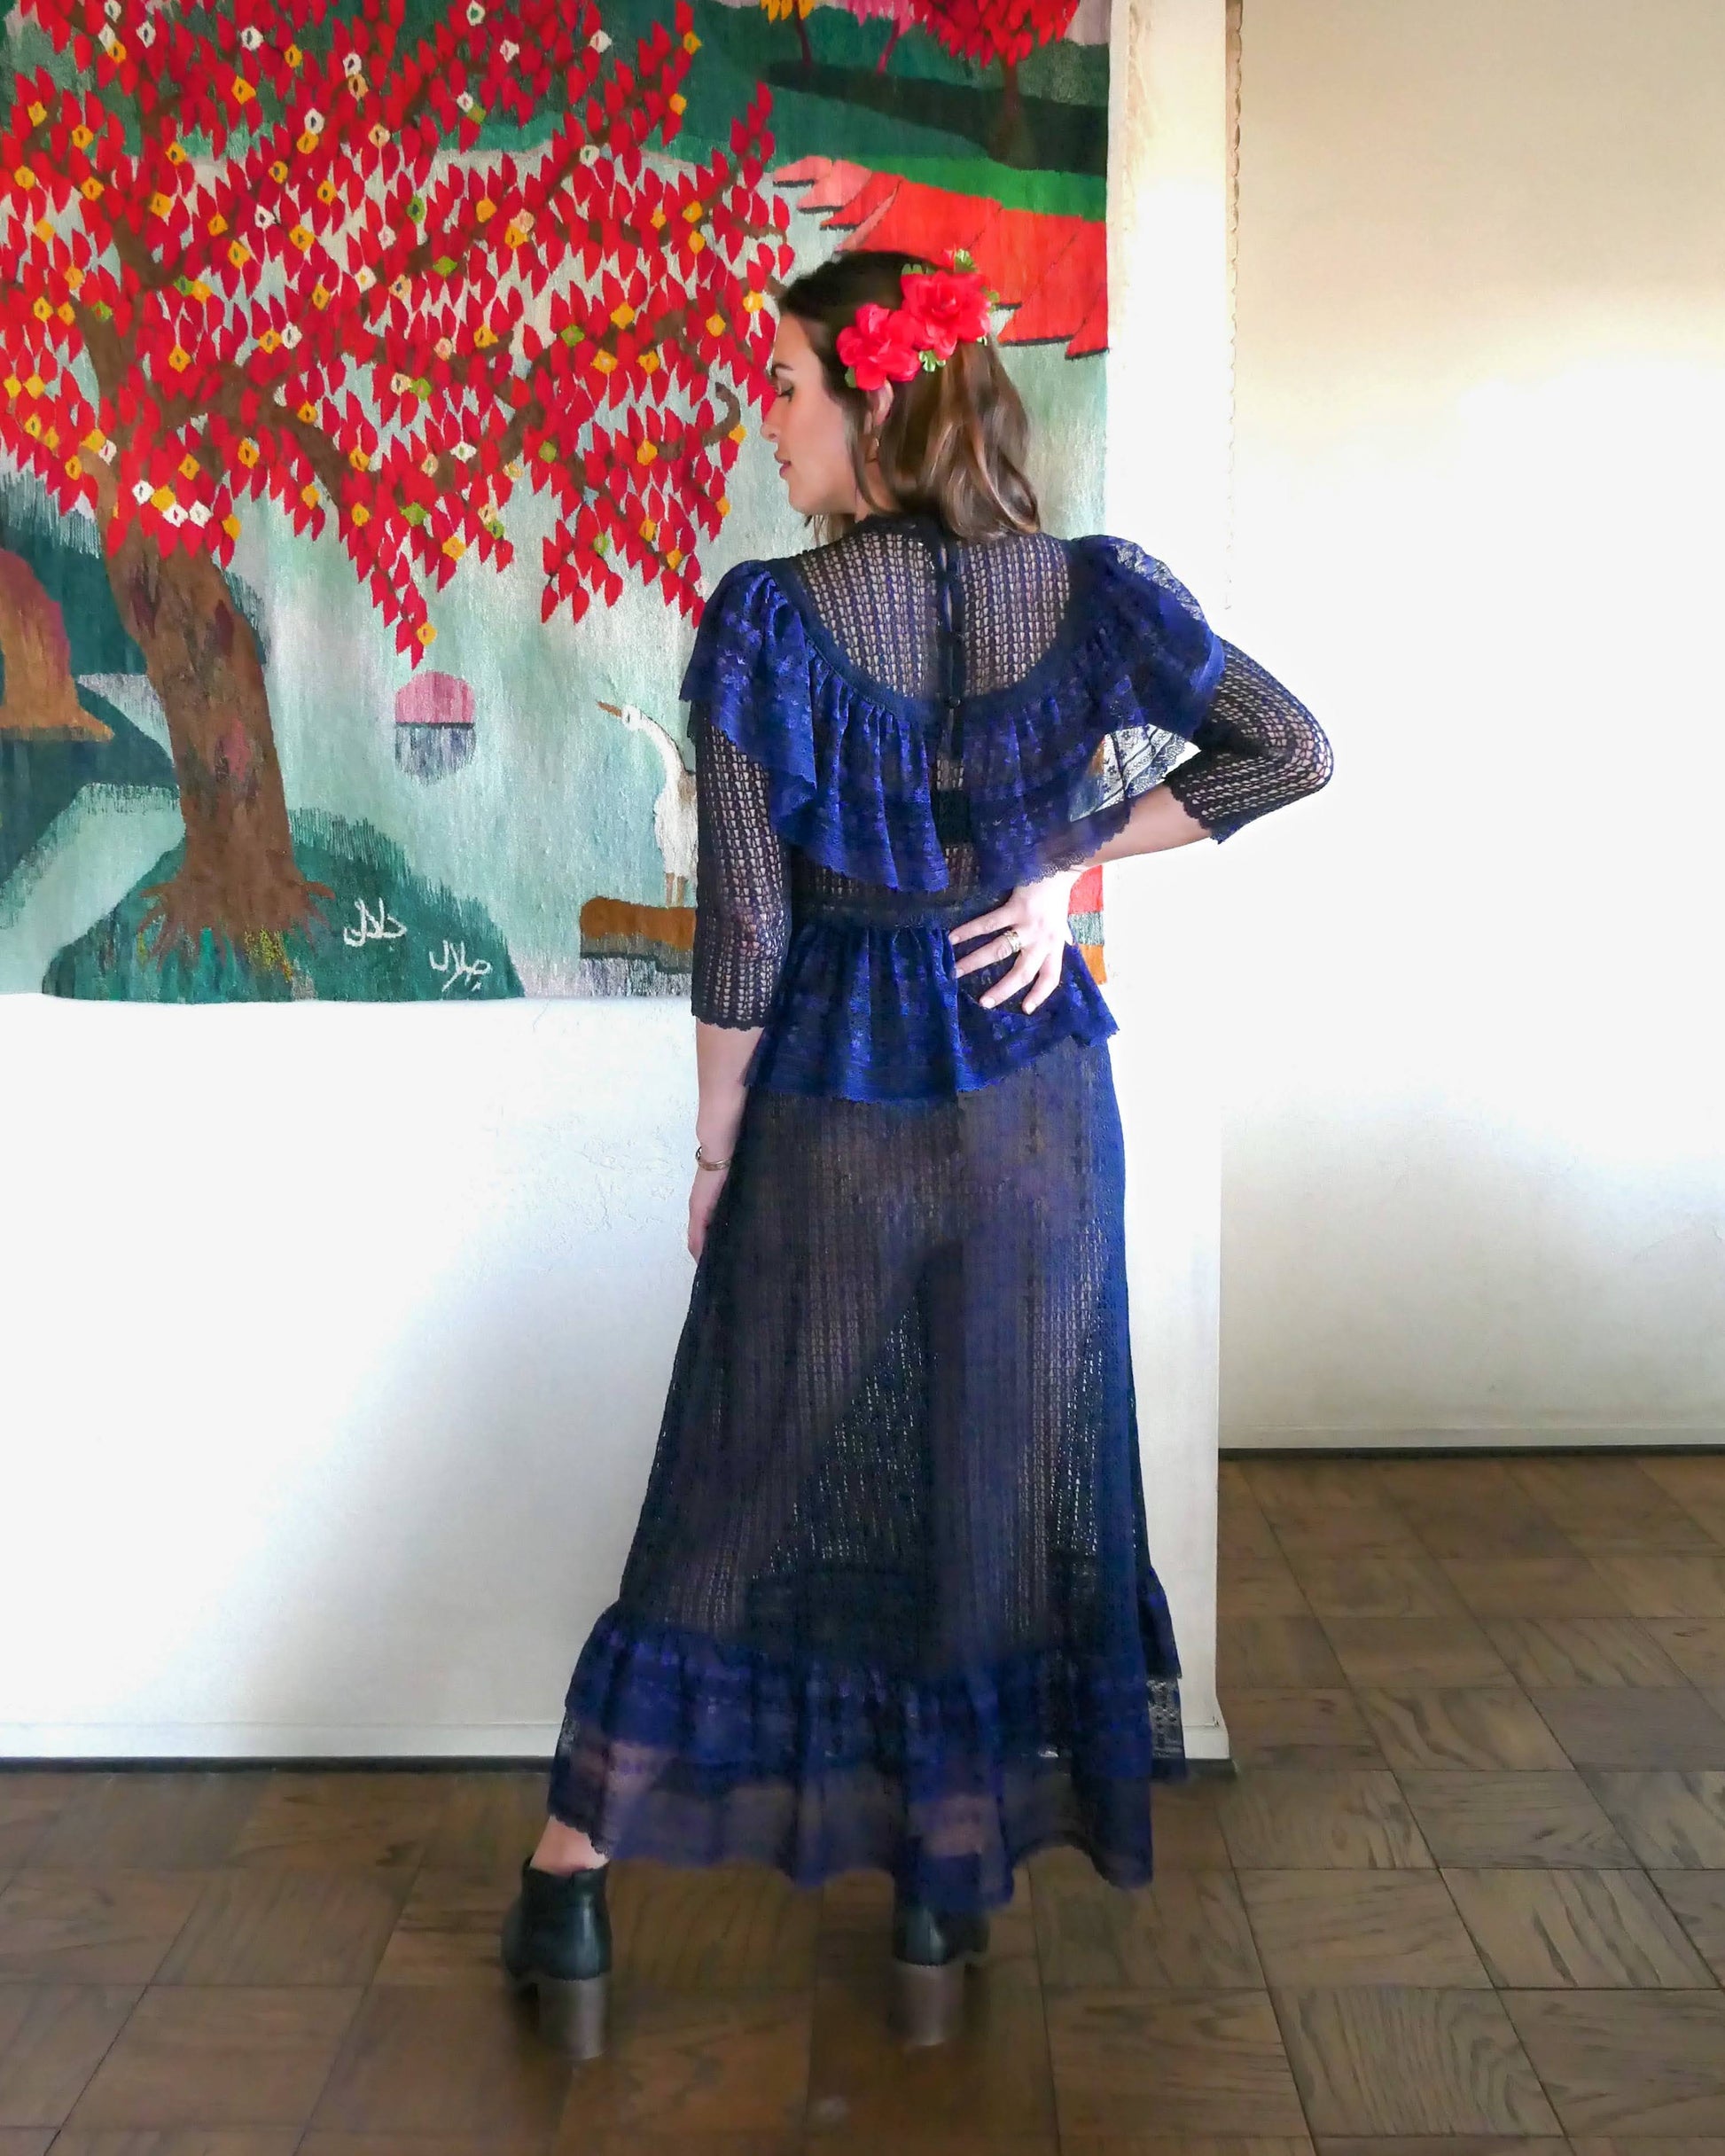 A sultry indigo blue Victorian style crochet maxi dress with lace trim and elastic waist. Can be worn with the buttons going down the front or back. Wear with a slip and high black boots for a dramatic evening look.  Size: Fits small to medium   Measurements:  Bust 31"-36” Waist 26”- 34" Length 52” Shoulder width 15” Sleeve 18” Hip 46"